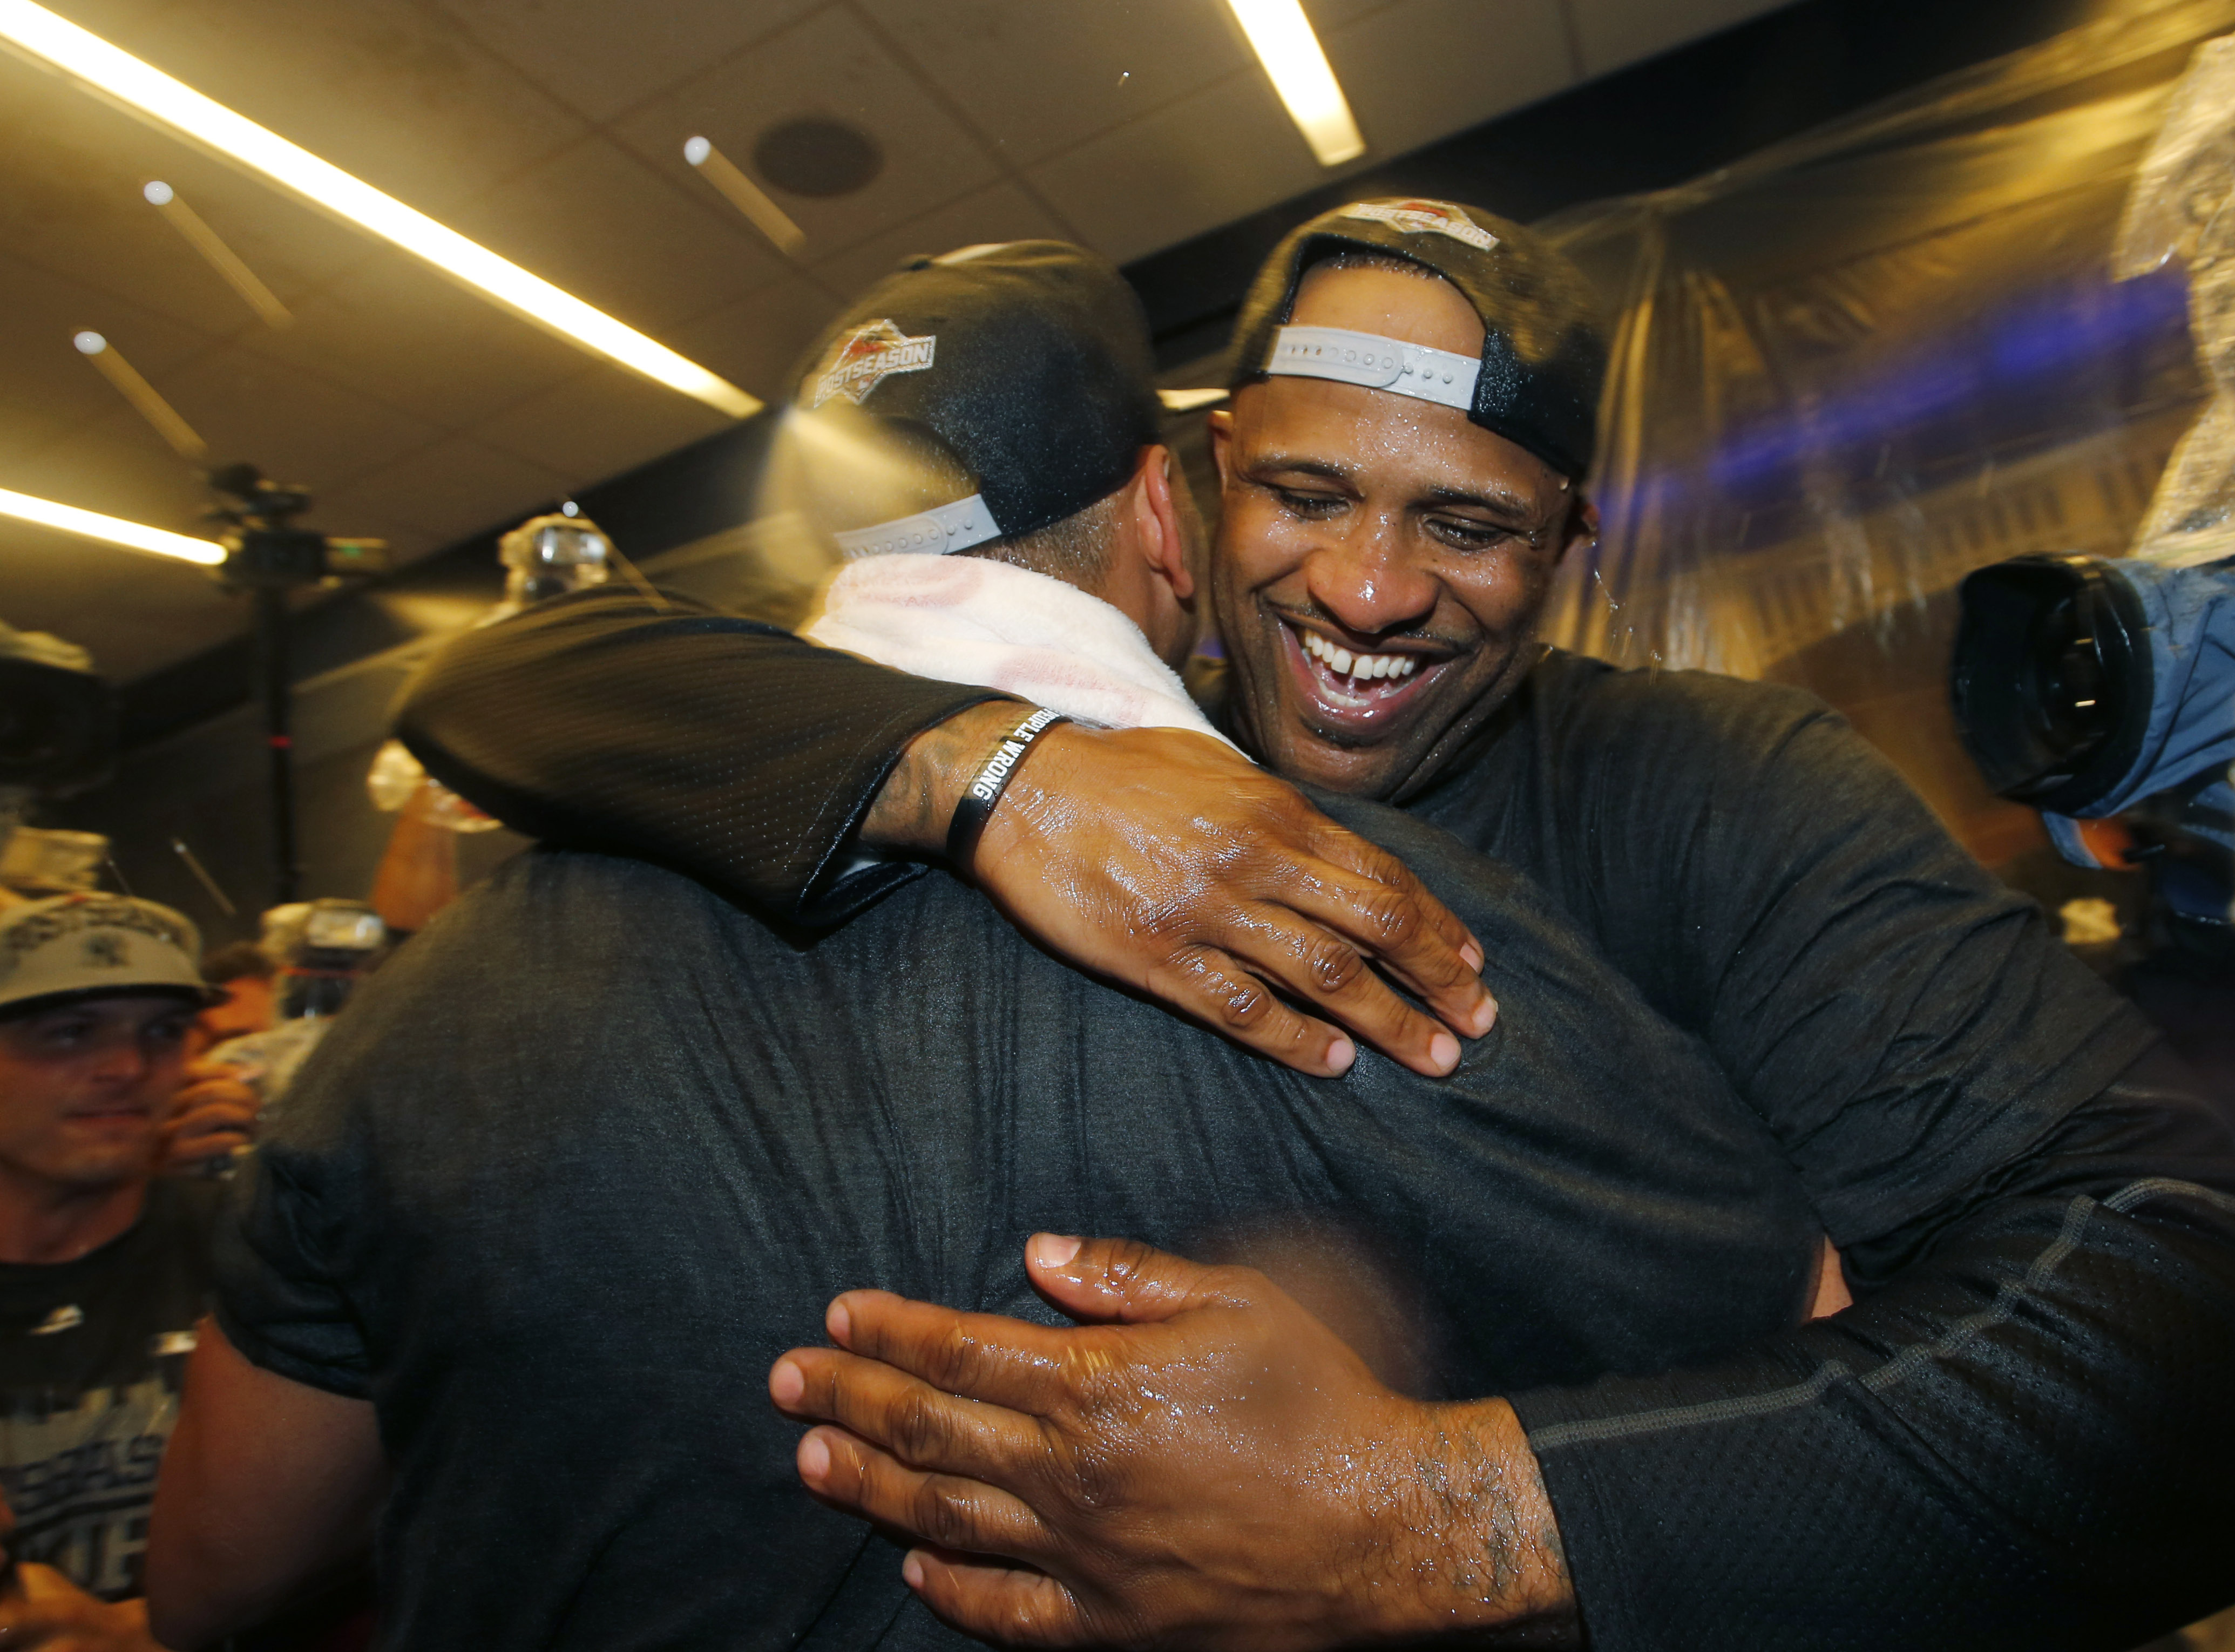 New York Yankees starting pitcher CC Sabathia (52) embraces a teammate after he helped the Yankees clinch a wild card berth in the playoffs after the Yankees defeated the Boston Red Sox 4-1 in a baseball game in New York, Thursday, Oct. 1, 2015.   (AP Photo/Kathy Willens)